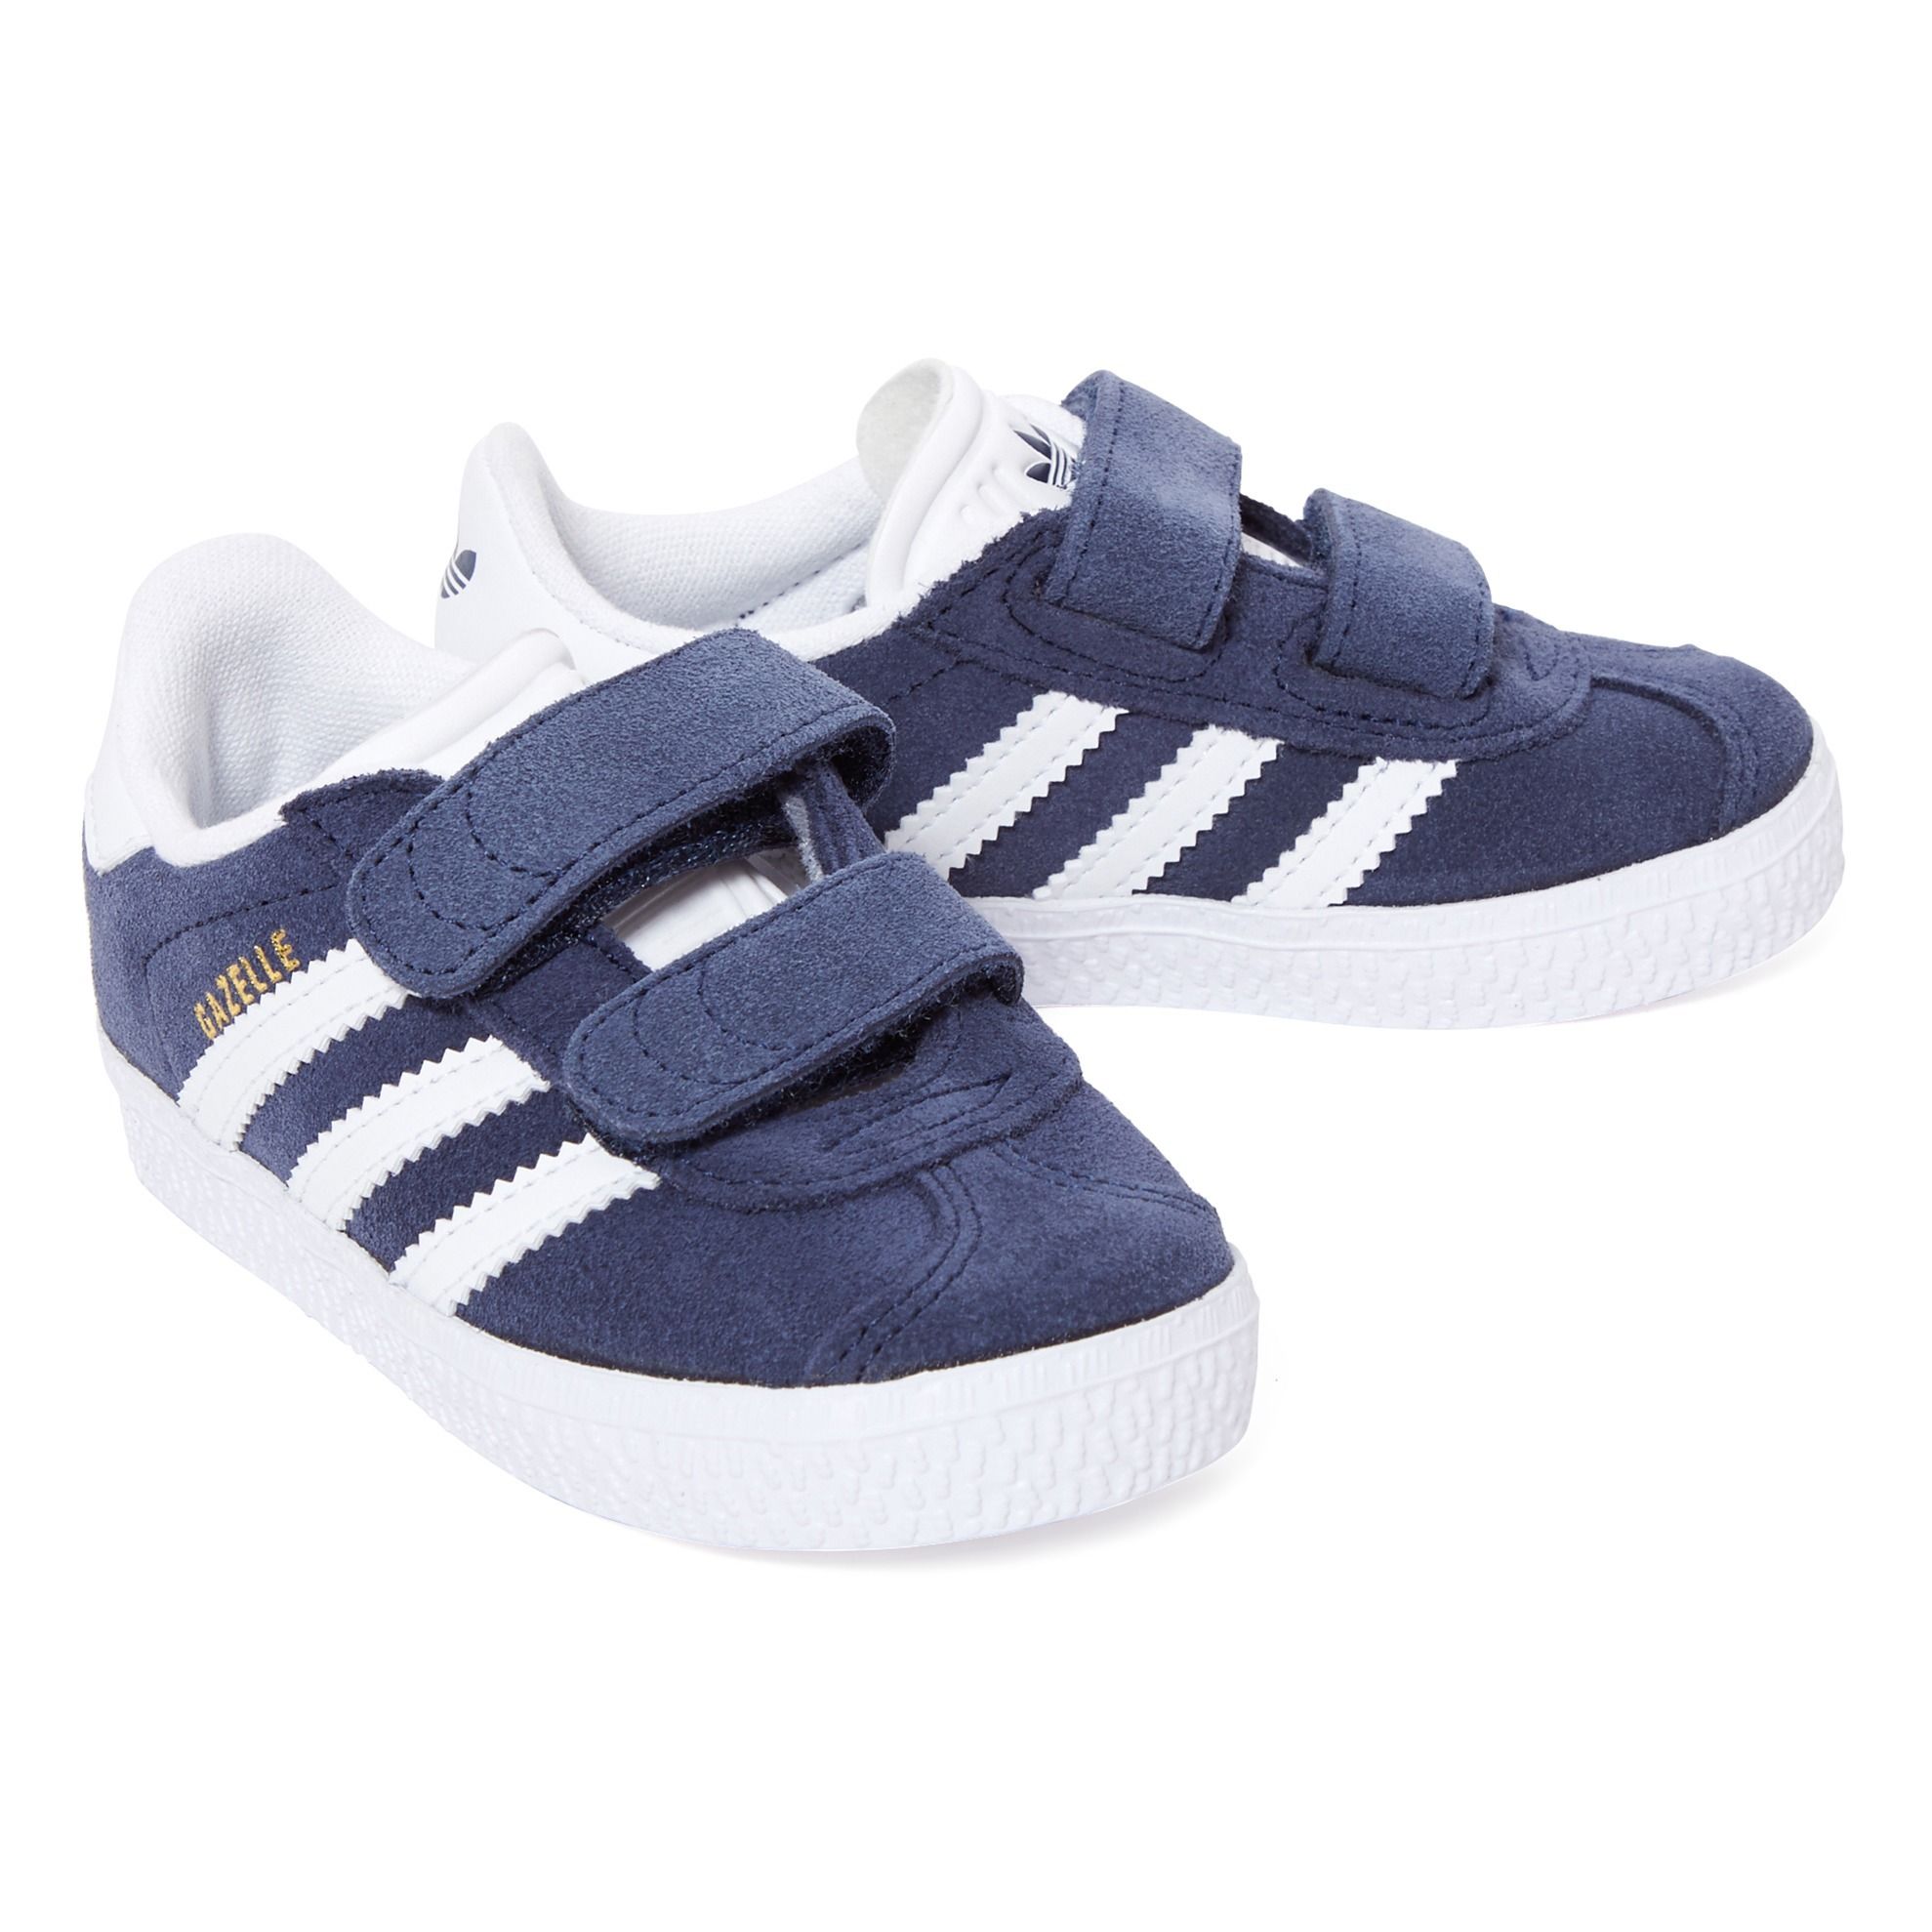 Gazelle 2 velcro trainers Navy blue Adidas Shoes Baby , Children